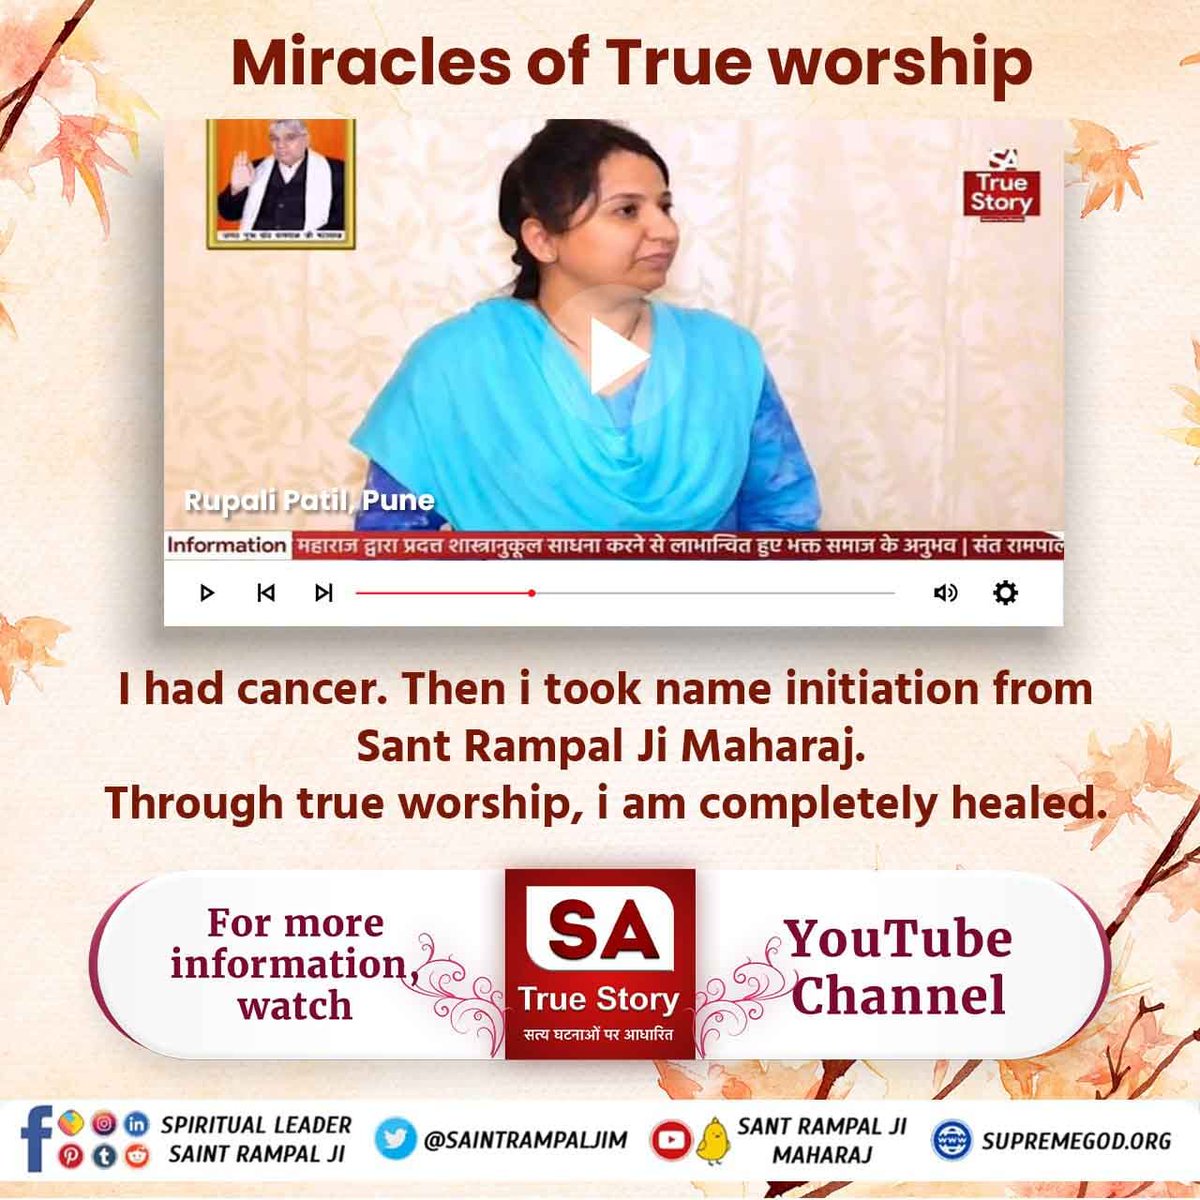 #ऐसे_सुख_देता_है_भगवान Miracles of True worship My name is Rupali patil Pune. I had cancer. Then I took Name initiation from Saint Rampal Ji Maharaj. Through True worship, I am completely healed. For more information watch sadhna Chanel 7:30pm daily